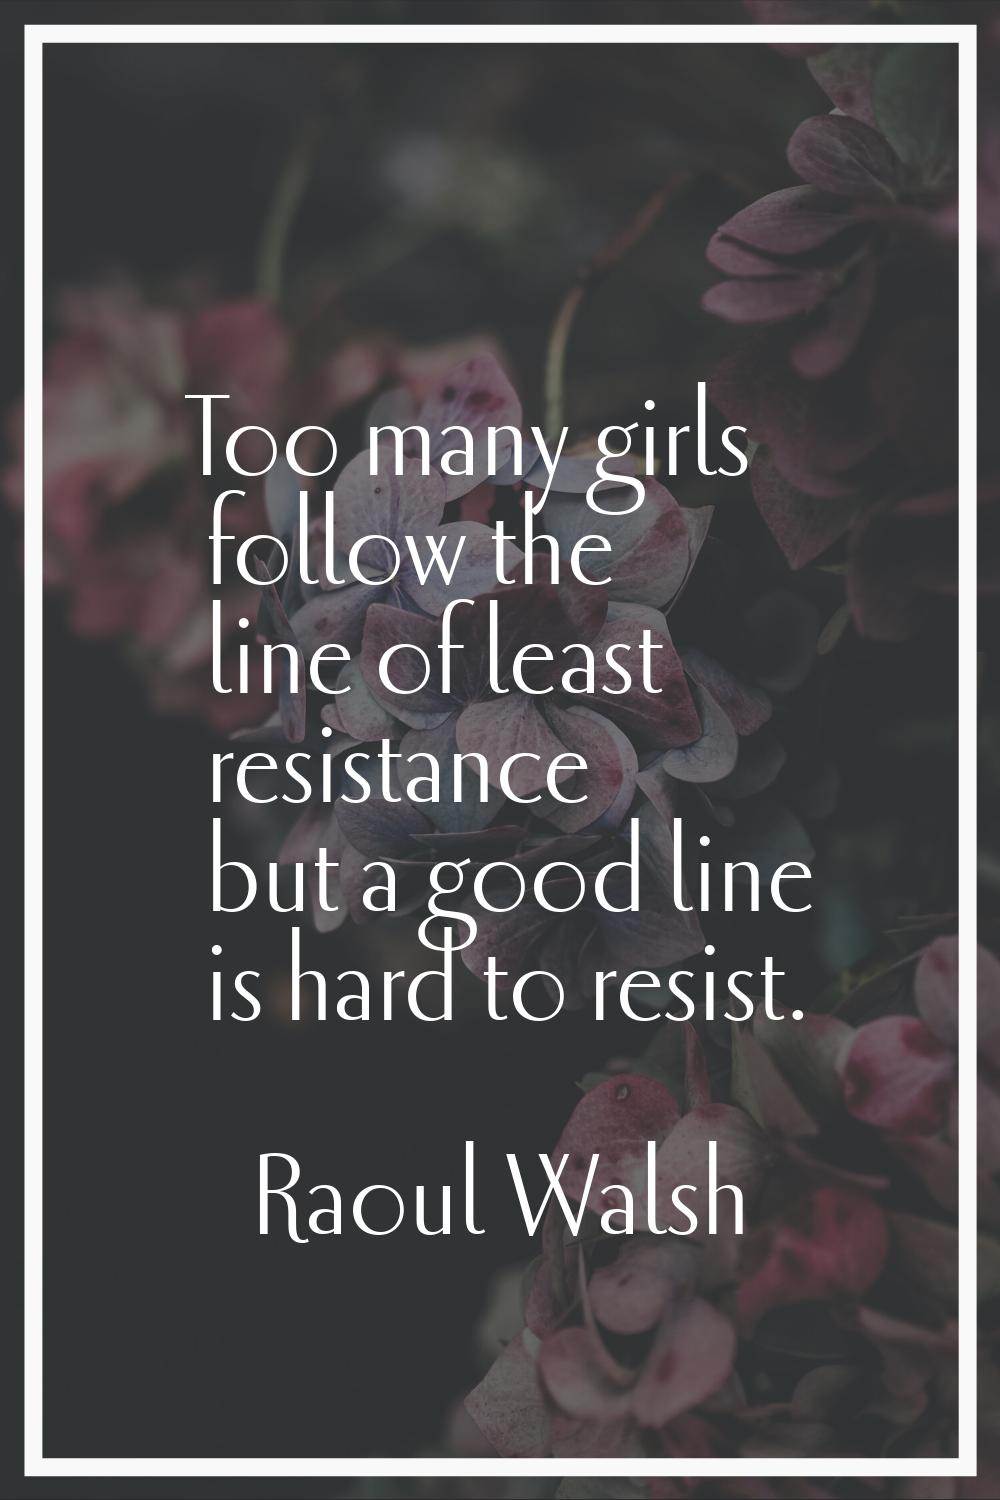 Too many girls follow the line of least resistance but a good line is hard to resist.